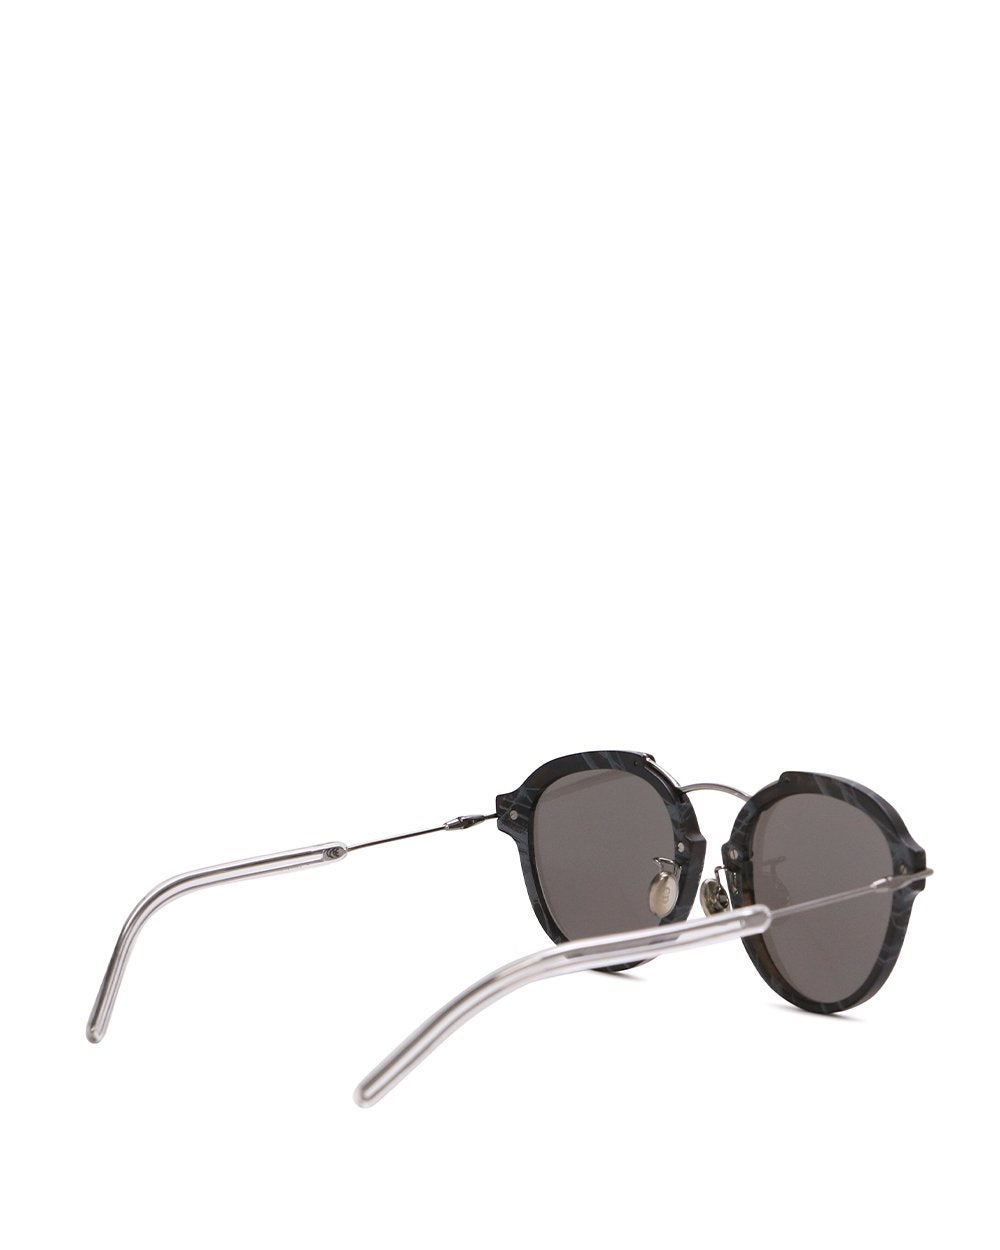 DIORECLAT Round Sunglasses - ISSI Outlet